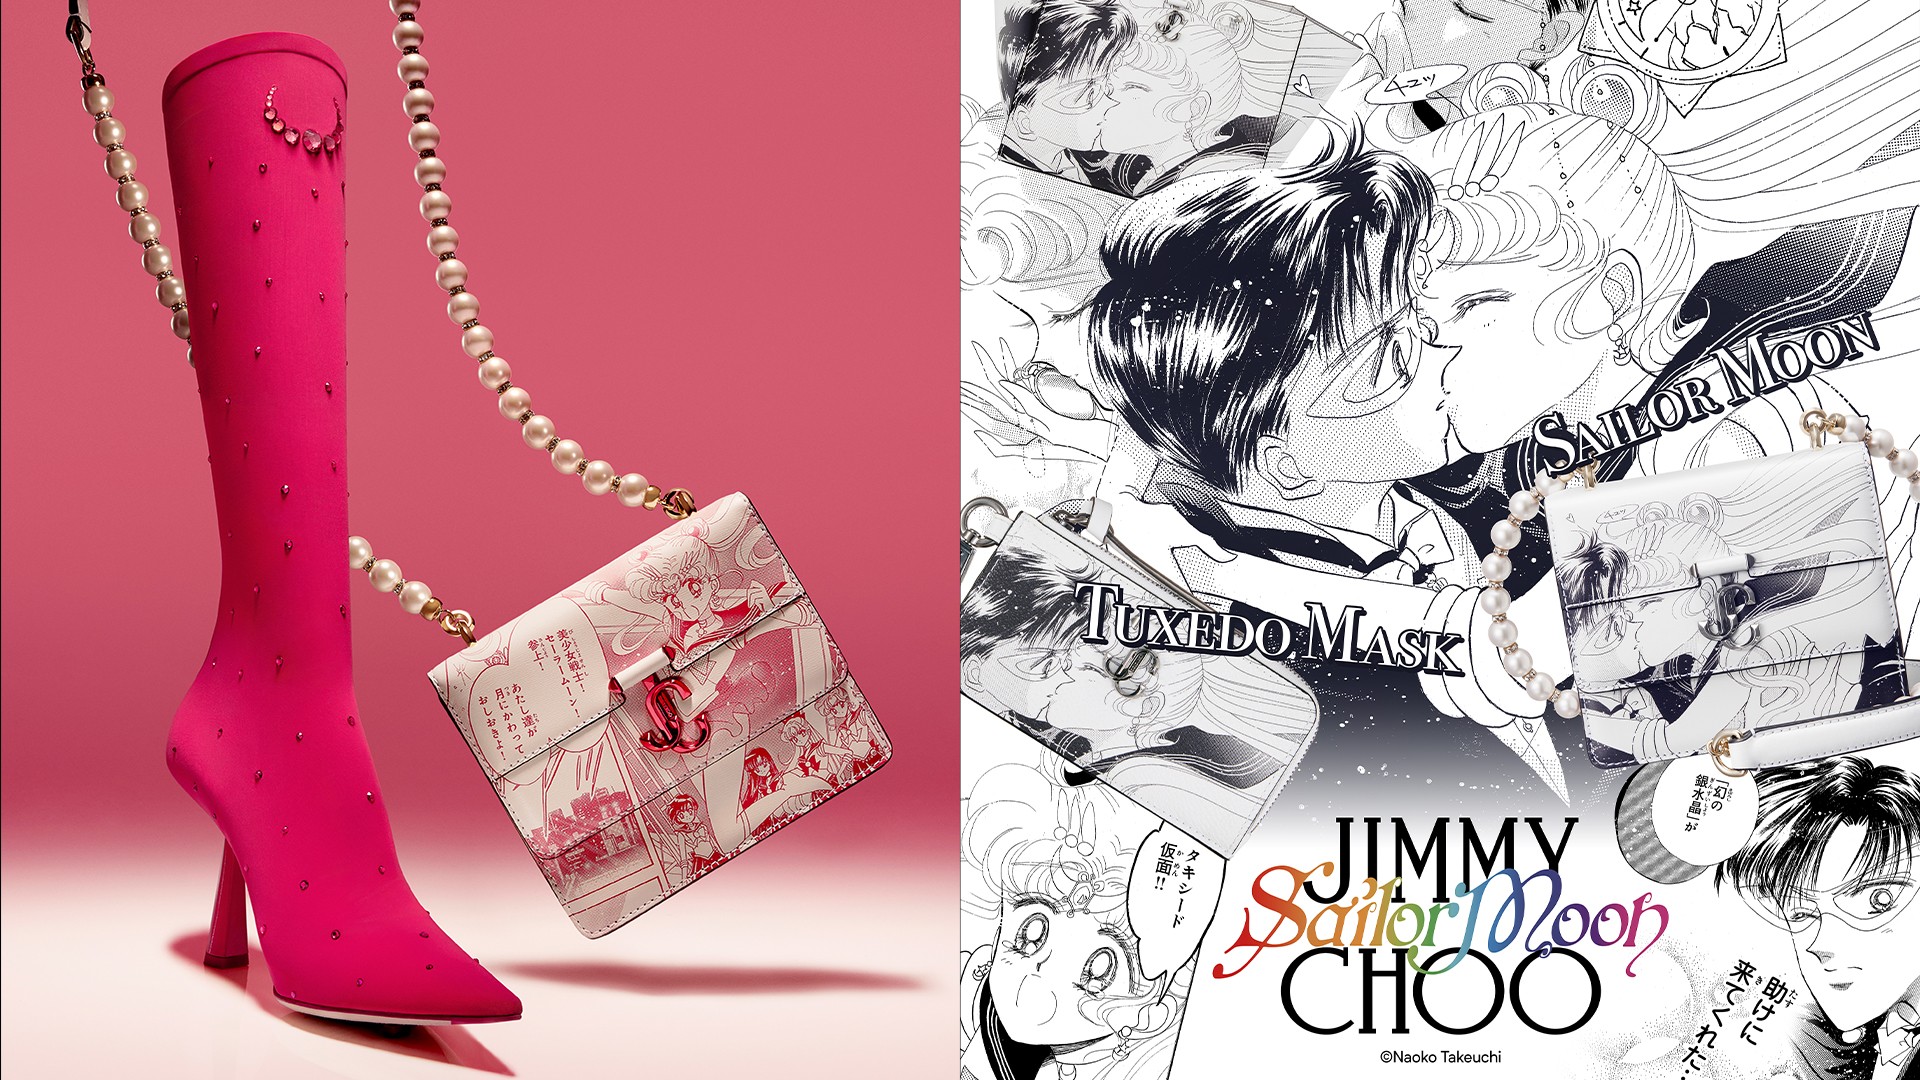 Jimmy Choo Celebrates Sailor Moon's 30th Anniversary in Style